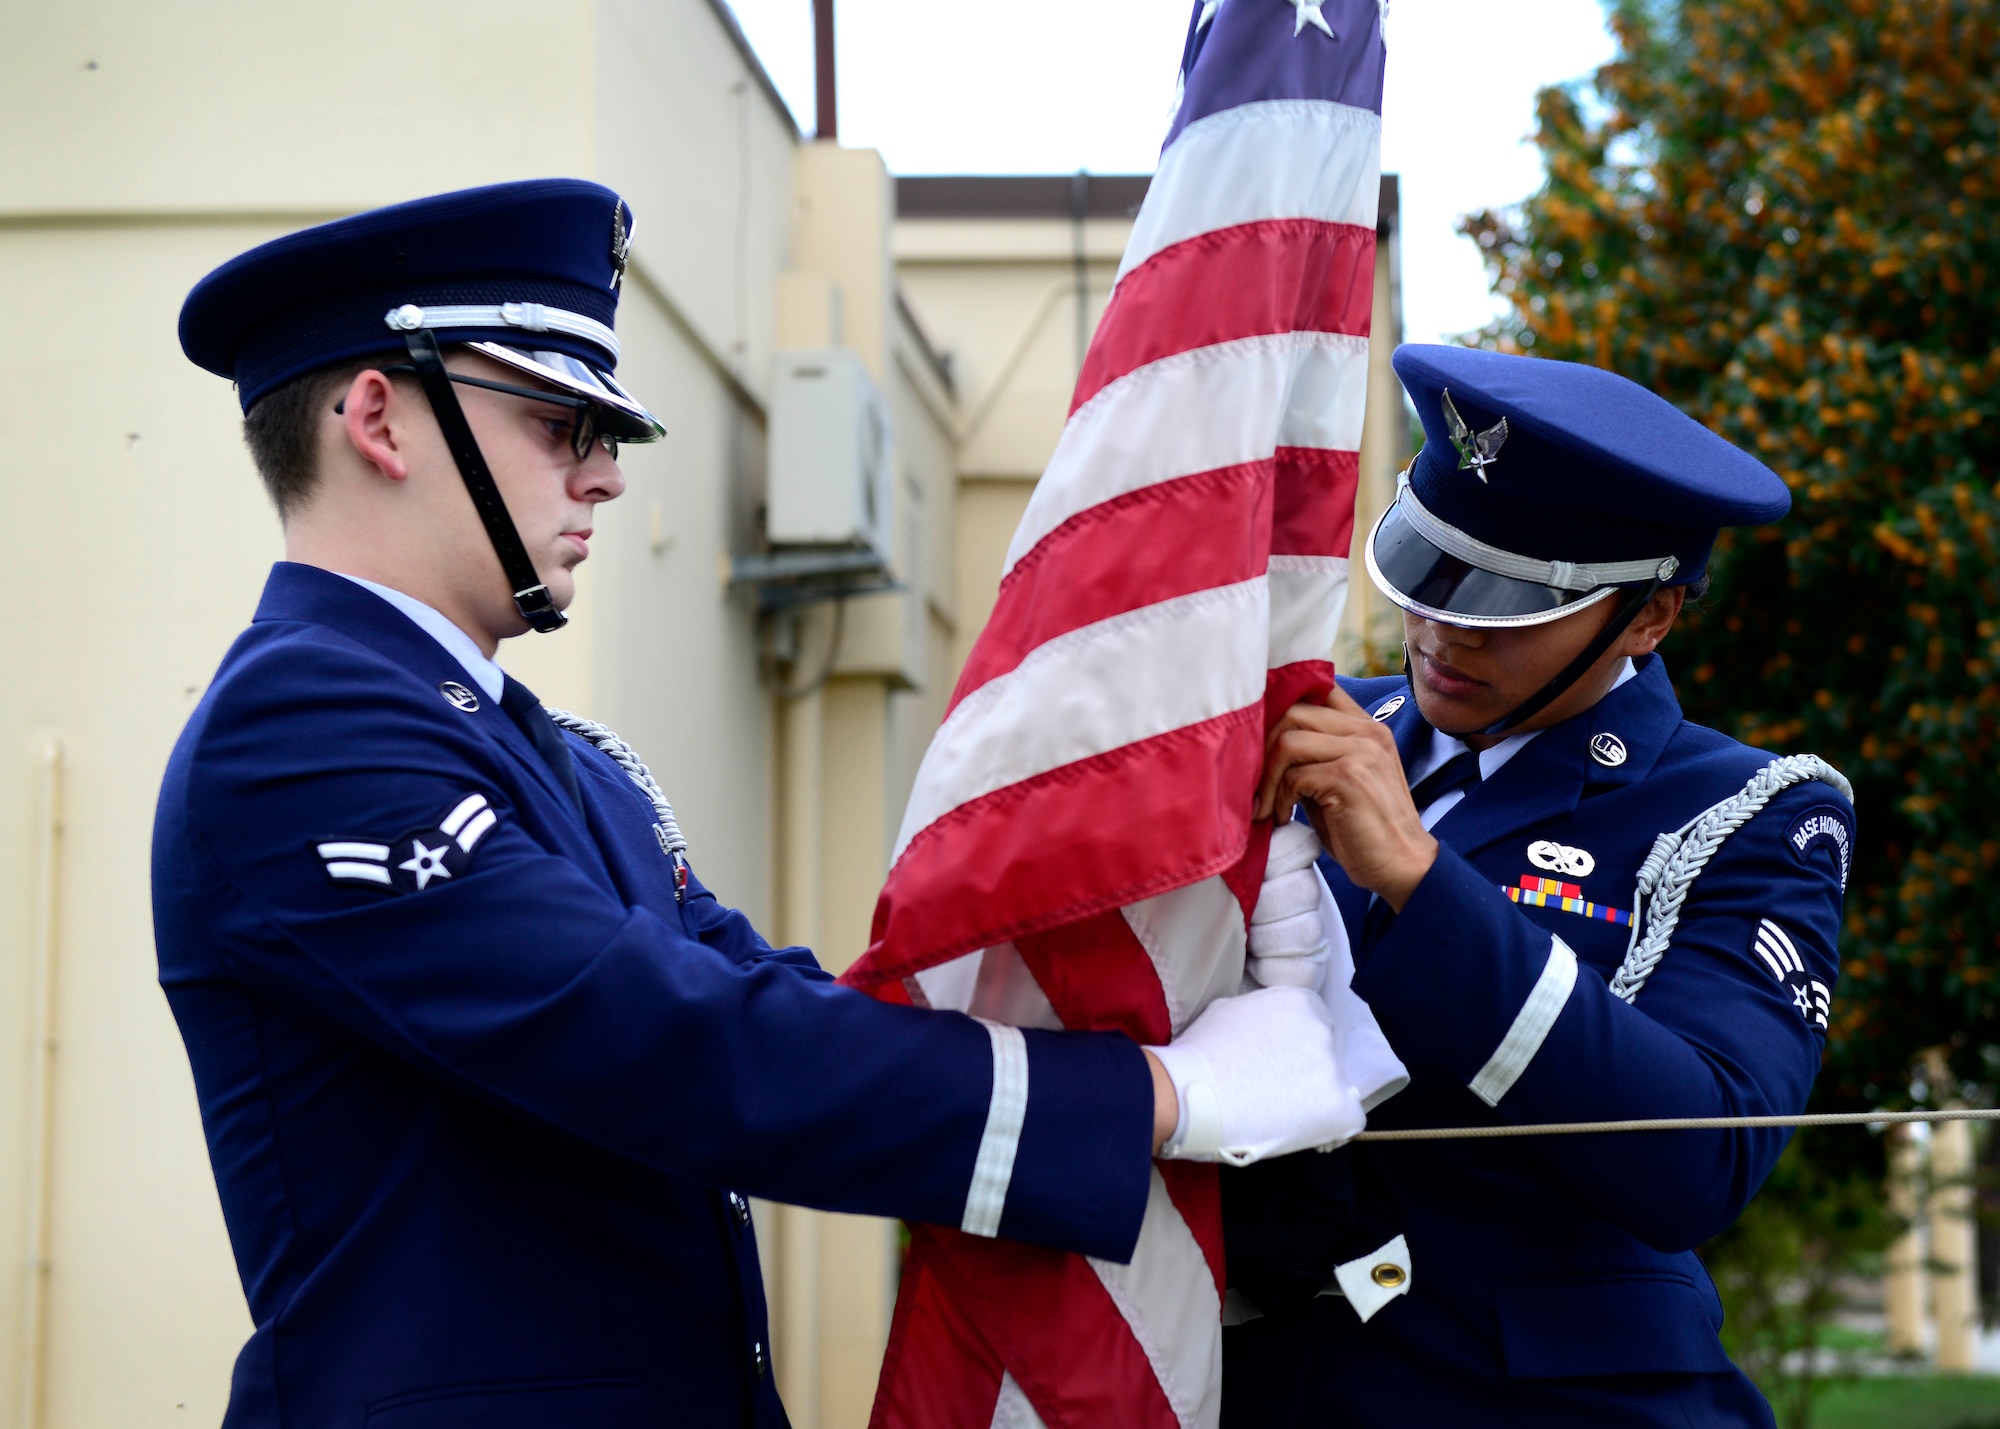 U.S. Air Force Airman 1st Class Roger Lanoie and Senior Airman Juanita Stewart, 31st Fighter Wing Honor Guard members, remove the Prisoner of War/Missing in Action flag during the remembrance week’s retreat ceremony Sept. 17, 2015, at Aviano Air Base, Italy. The Air Force Sergeants Association hosted several events during the week, including a vigil run and table ceremony to remember fellow service members. (U.S. Air Force photo by Senior Airman Areca T. Bell/Released)